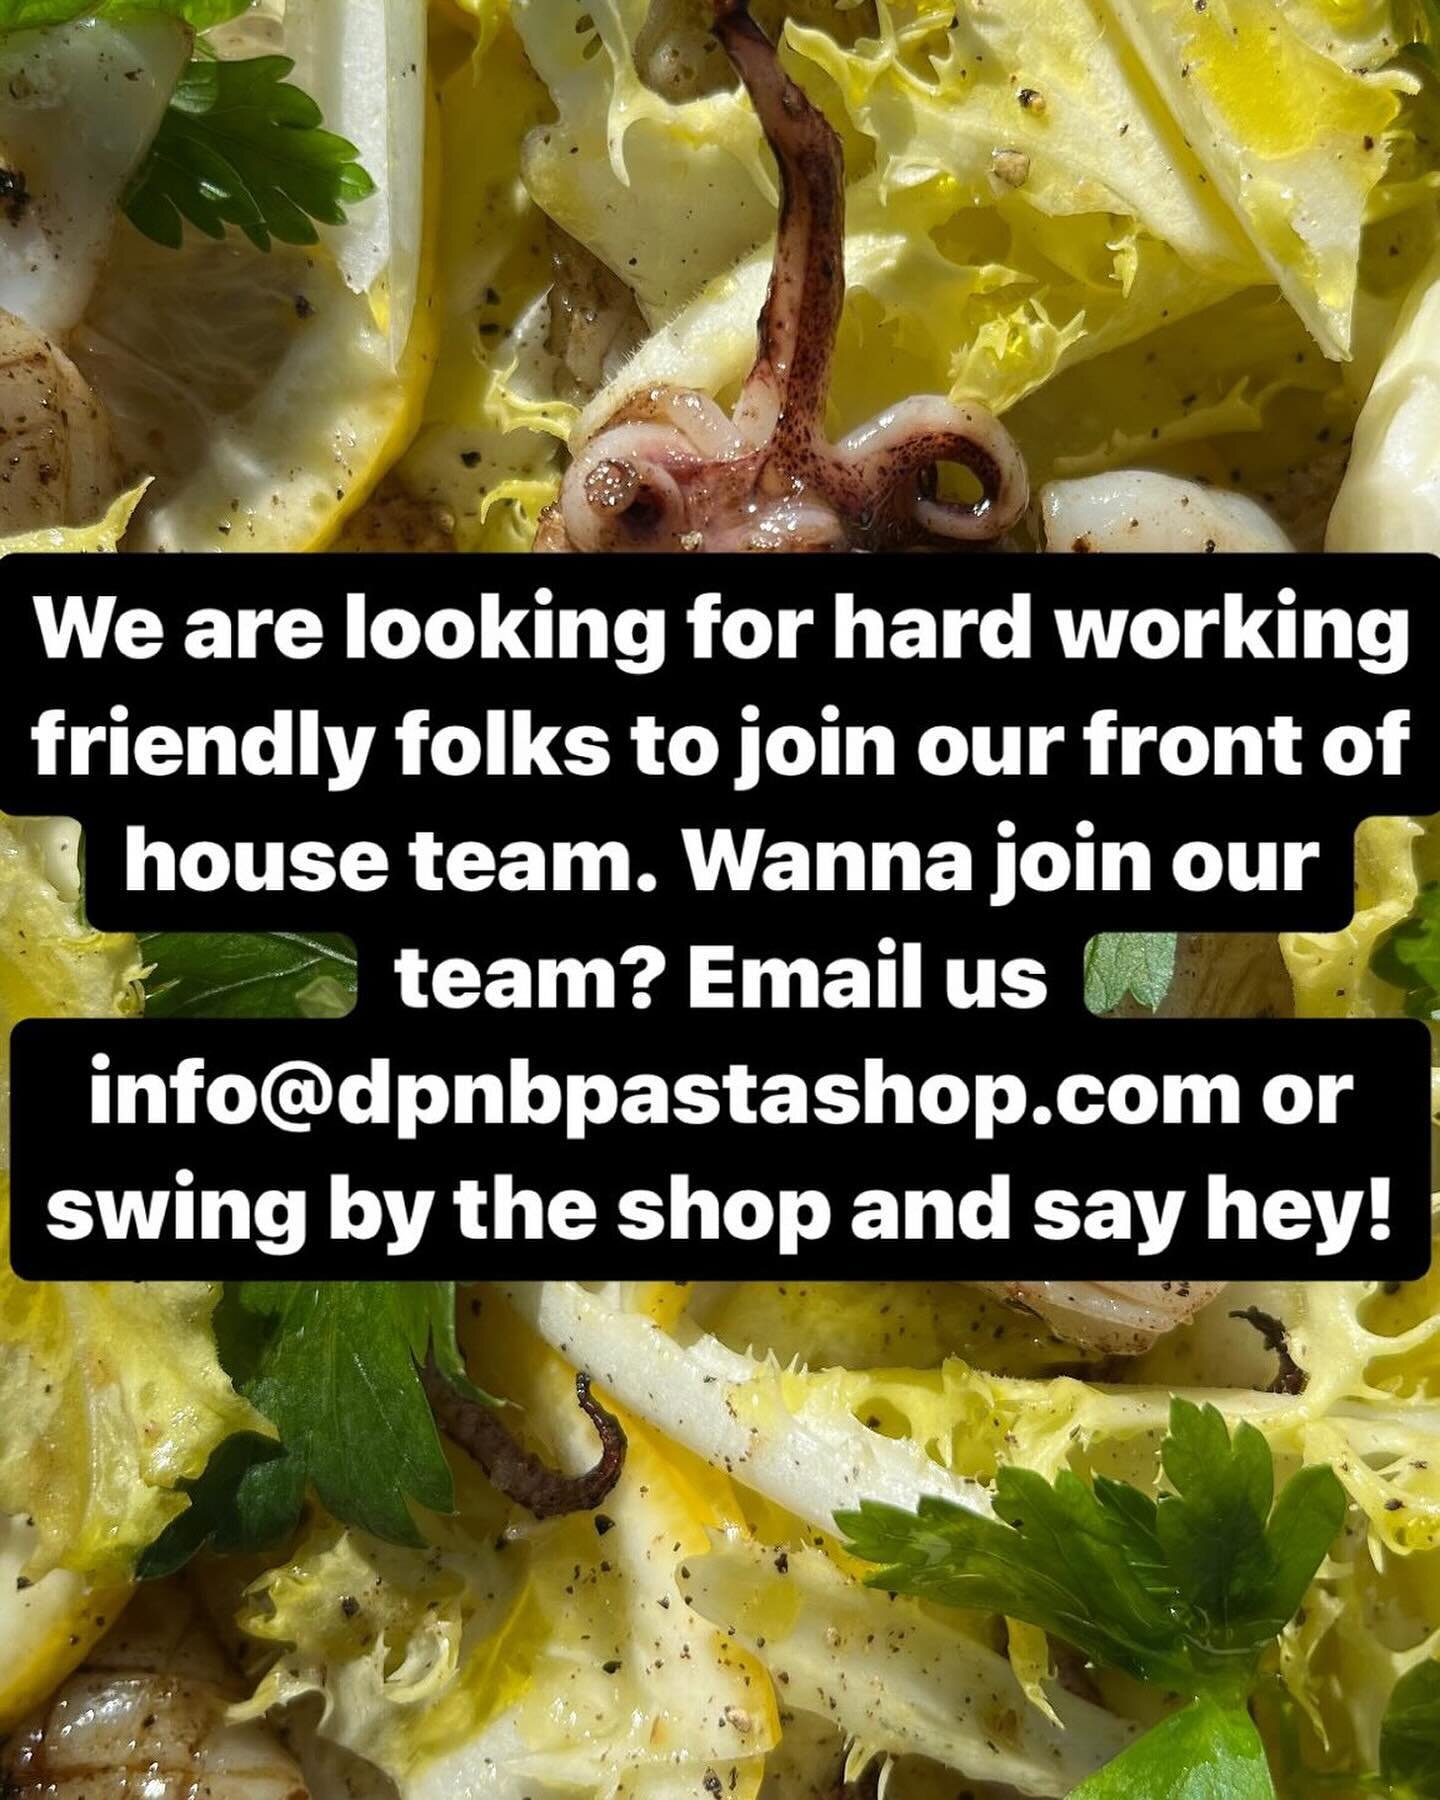 Spring is gonna spring soon which means we are looking for front of house folks to join an already great team. We are looking for full time and some part time help. Experience is nice but not required, must be able to work evenings and weekends. 
Ema